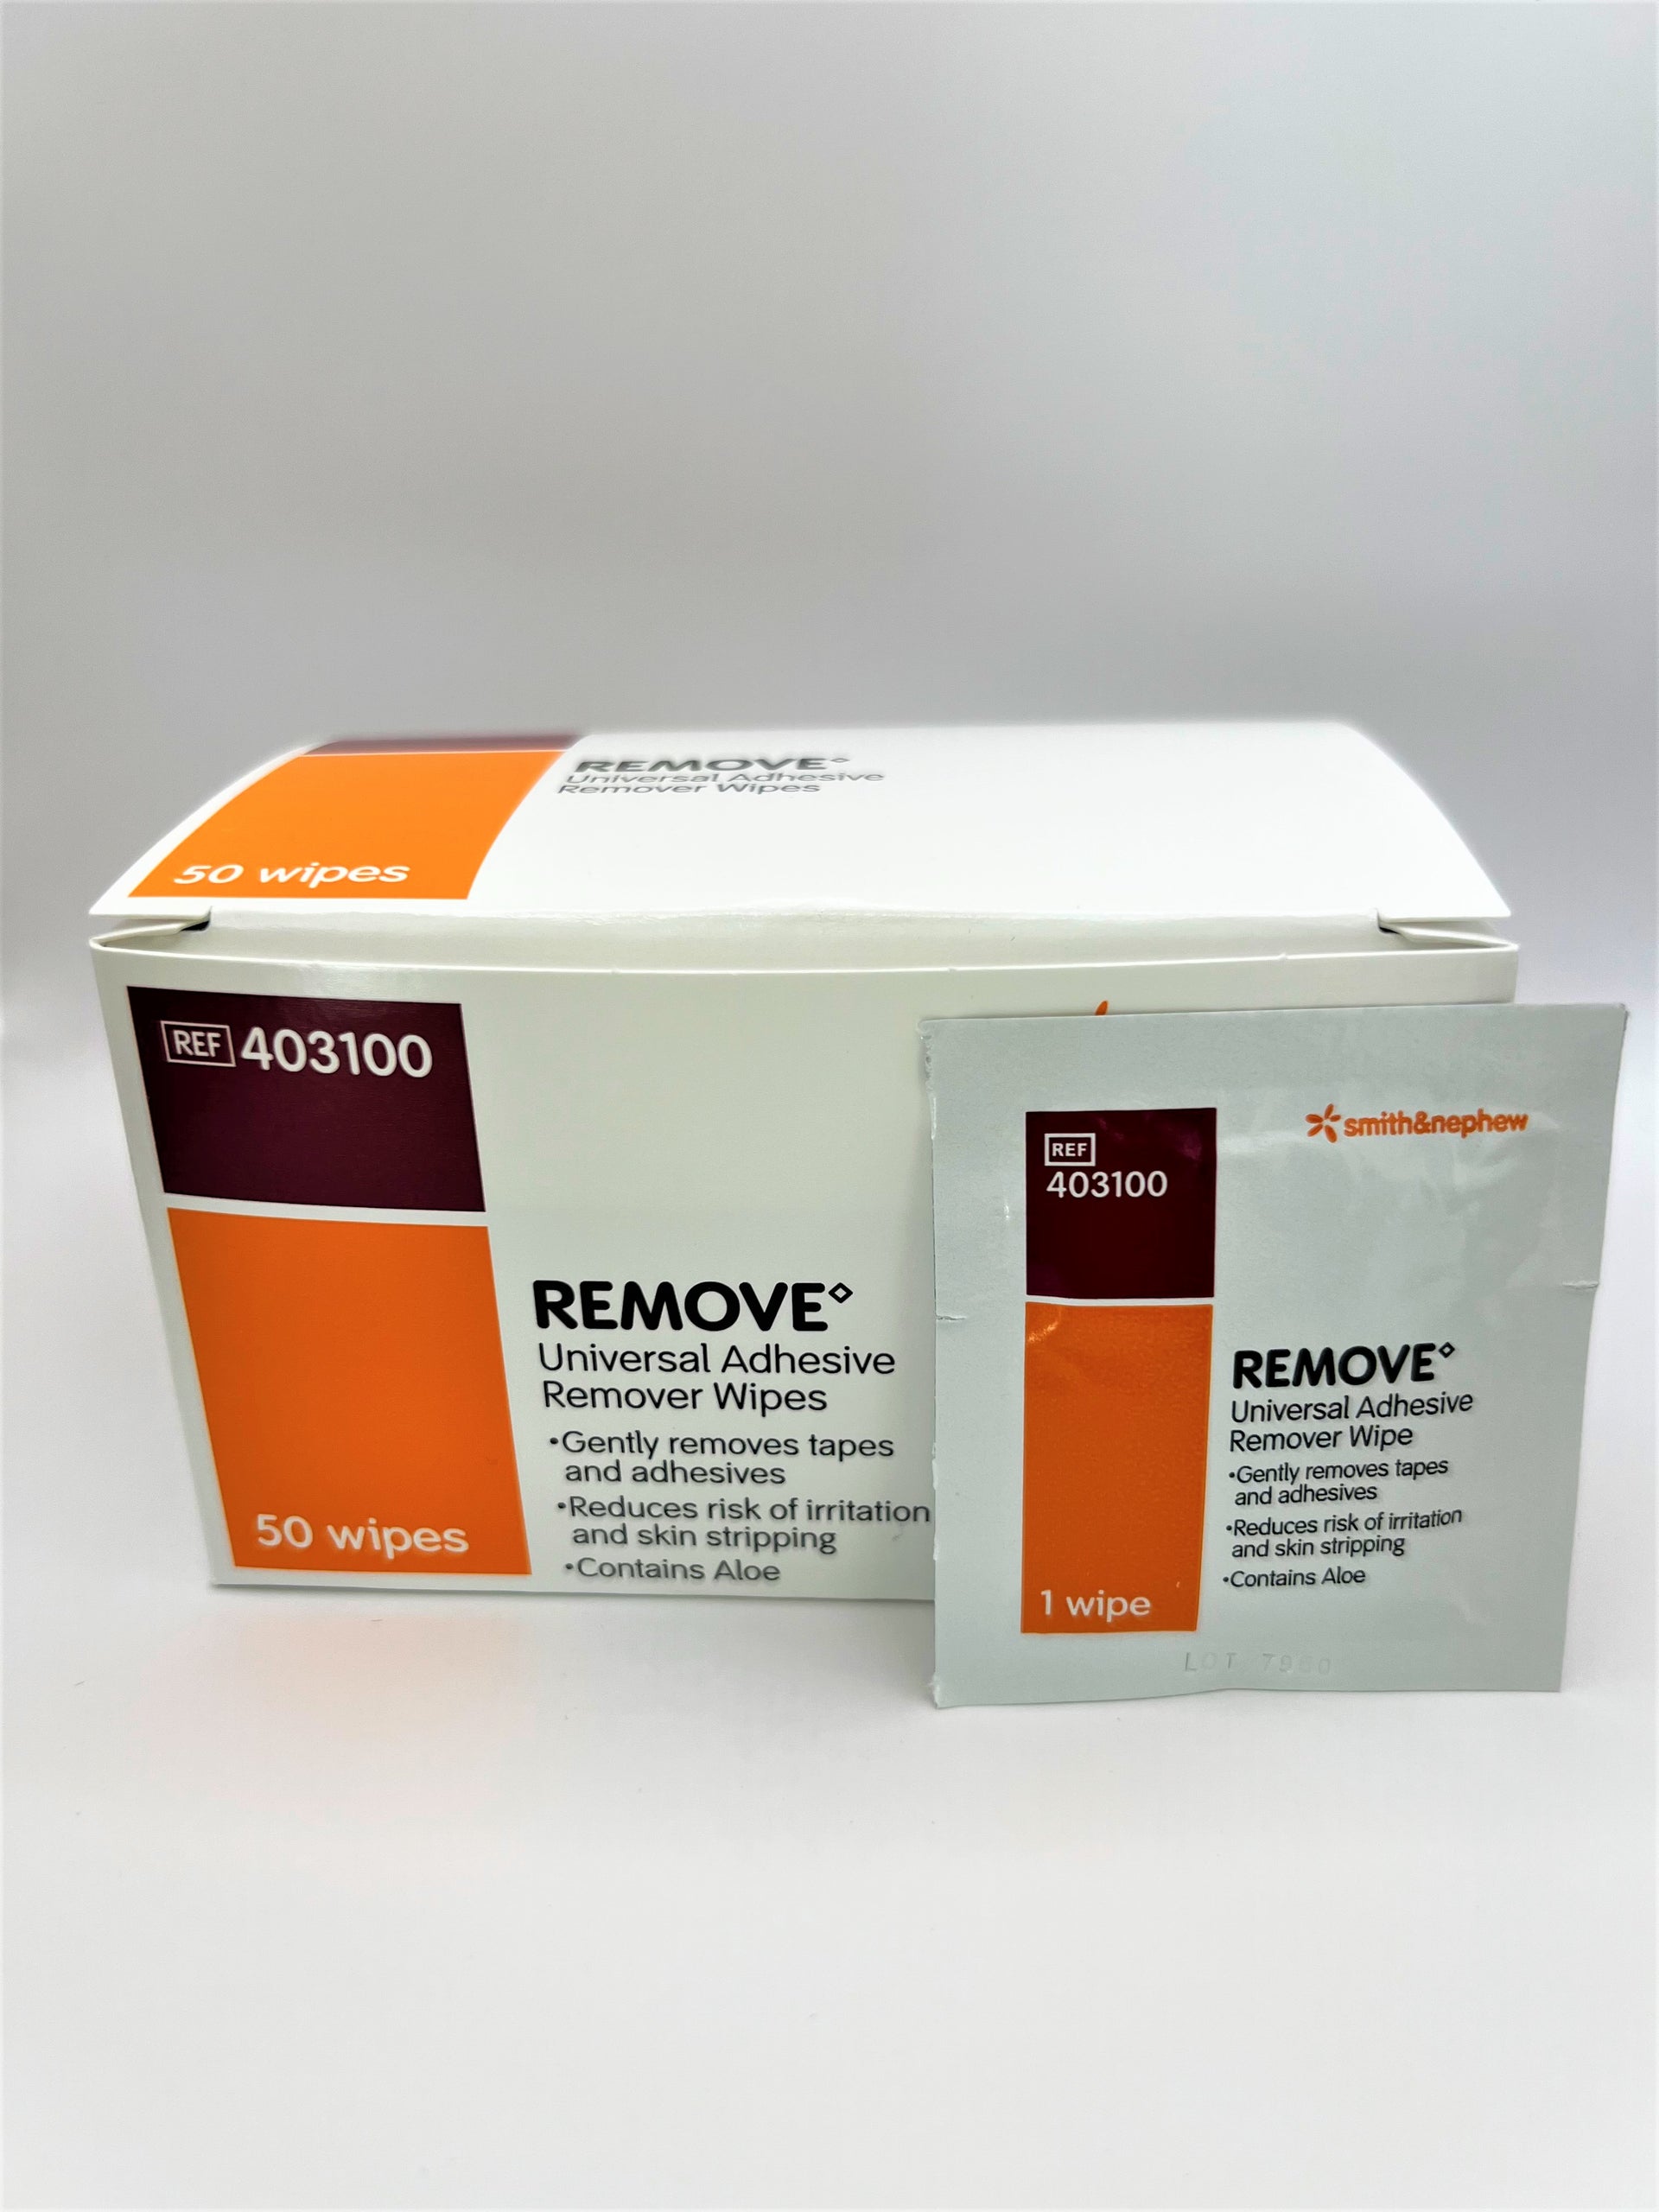 Remove™ Adhesive Remover Wipes - Medical Supplies and Equipment